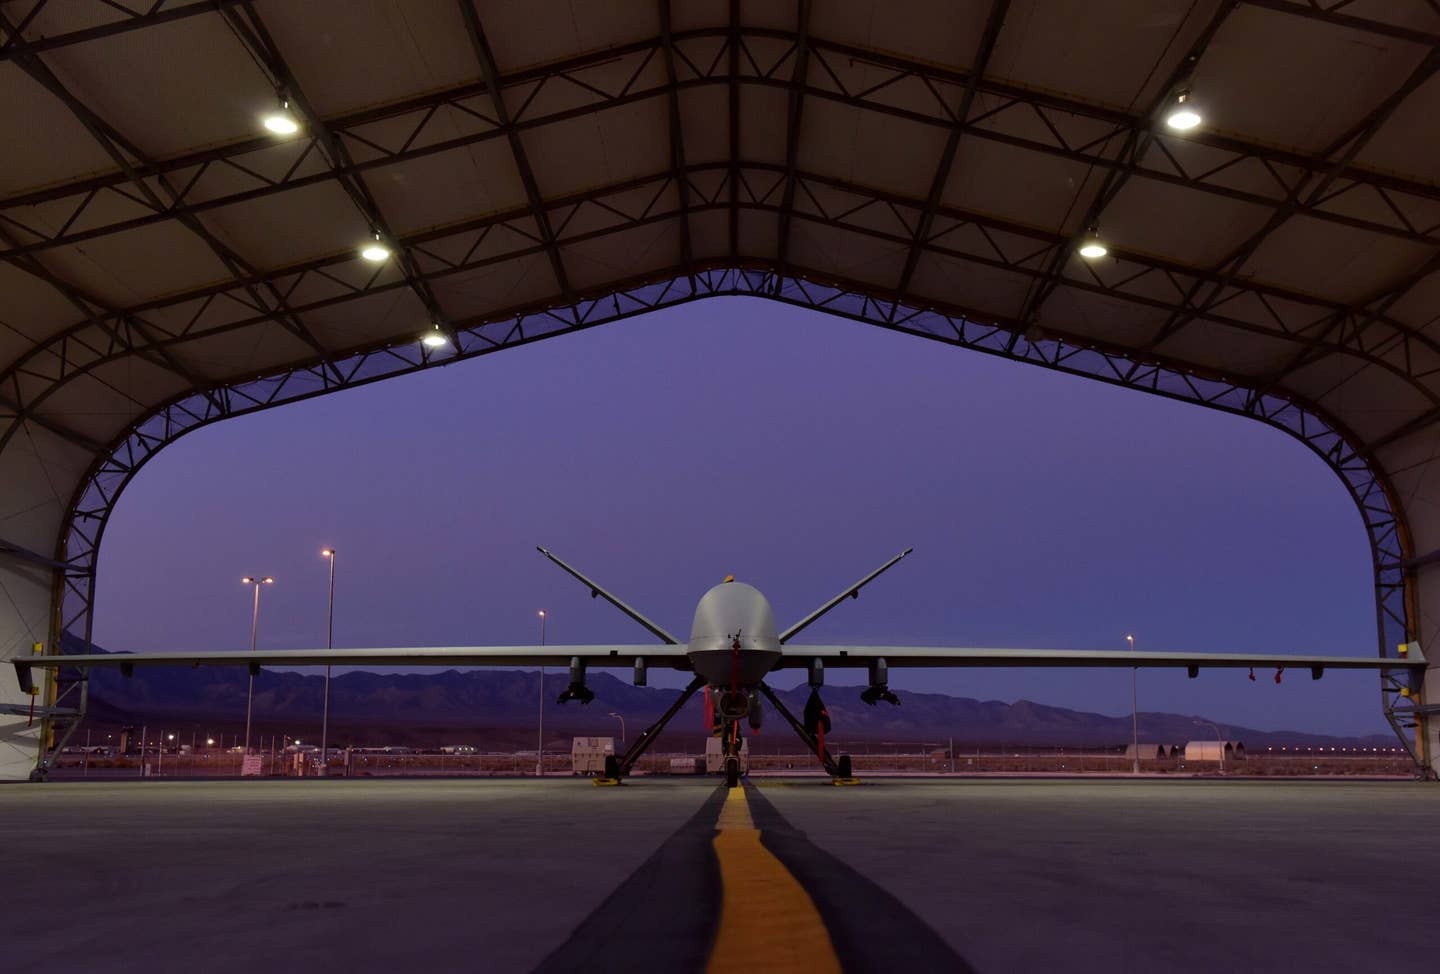 An MQ-9 Reaper sits under a sunshade in the early morning at Creech Air Force Base, Nevada, Oct. 25, 2019. <em>Credit: U.S. Air Force photo by Senior Airman Haley Stevens</em>